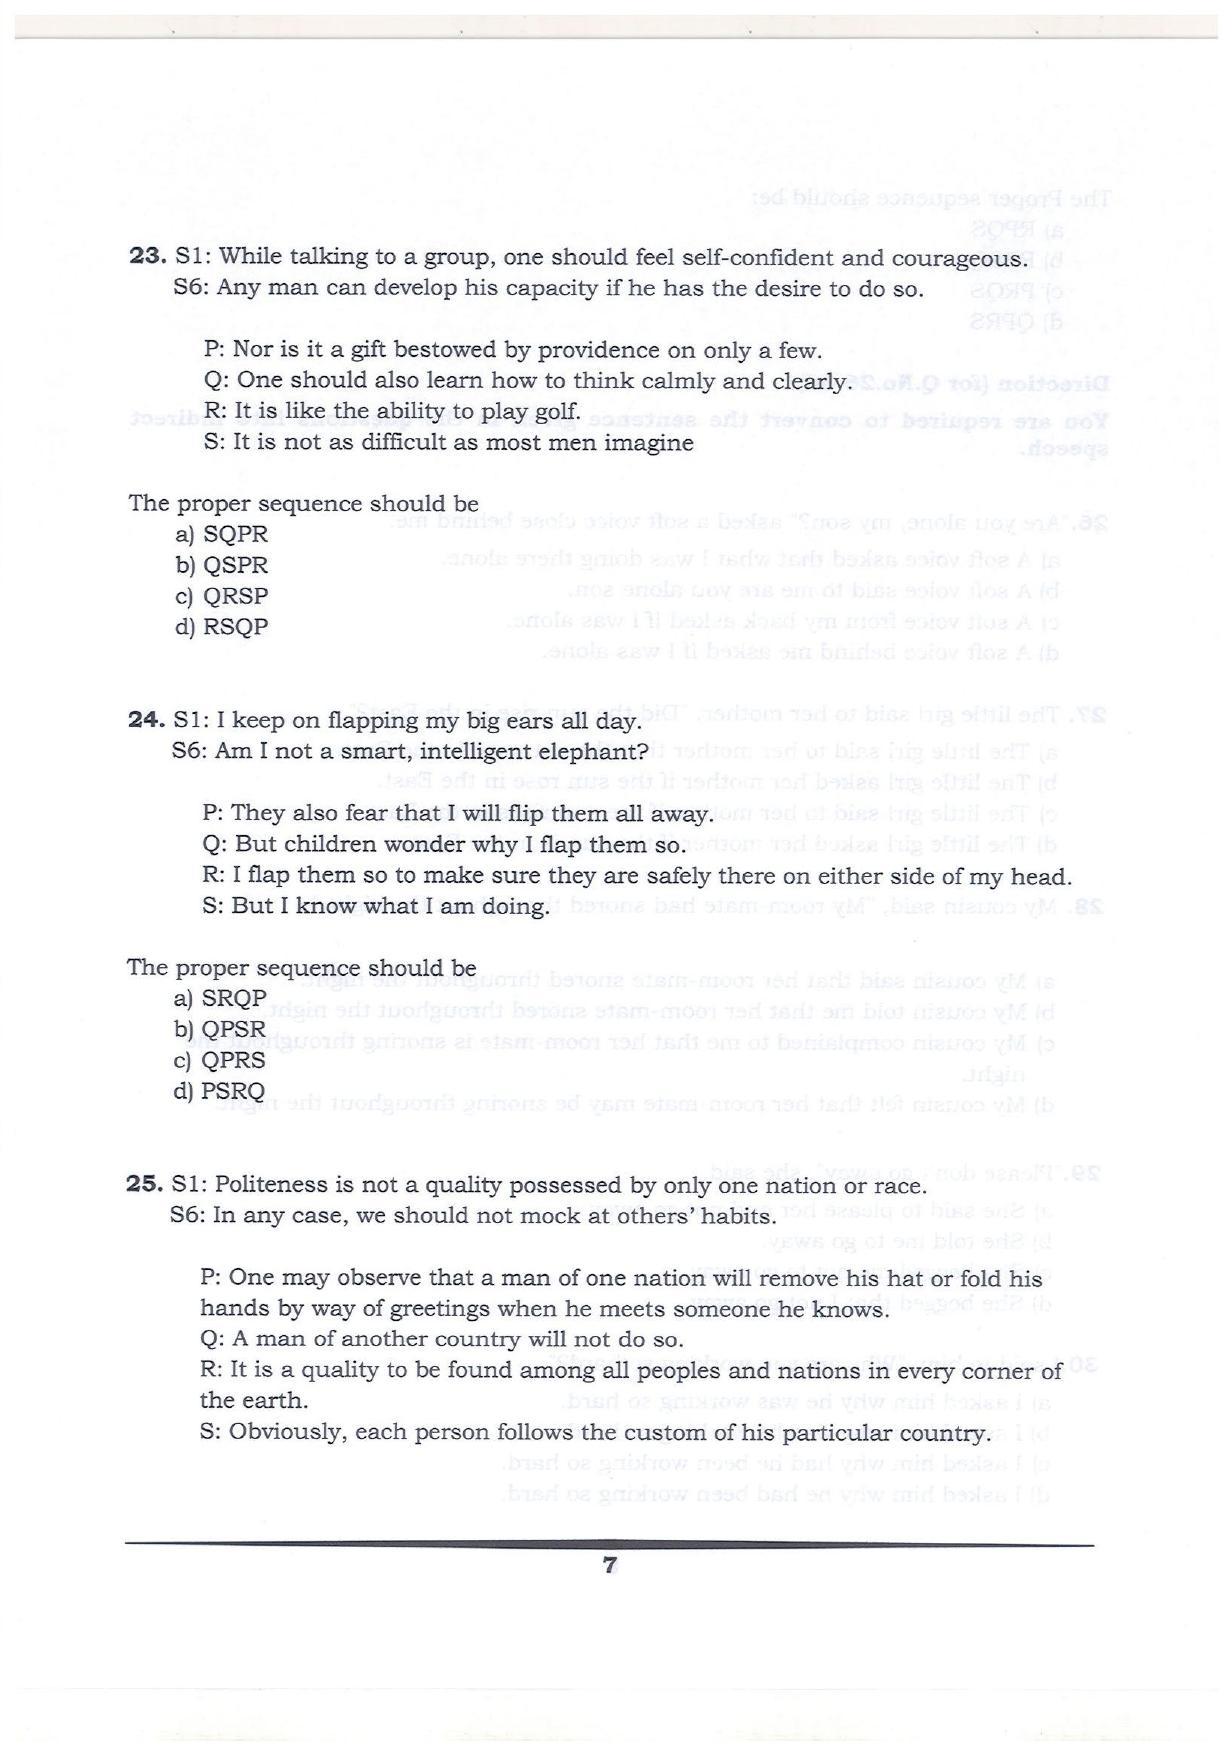 KMAT Question Papers - February 2018 - Page 6